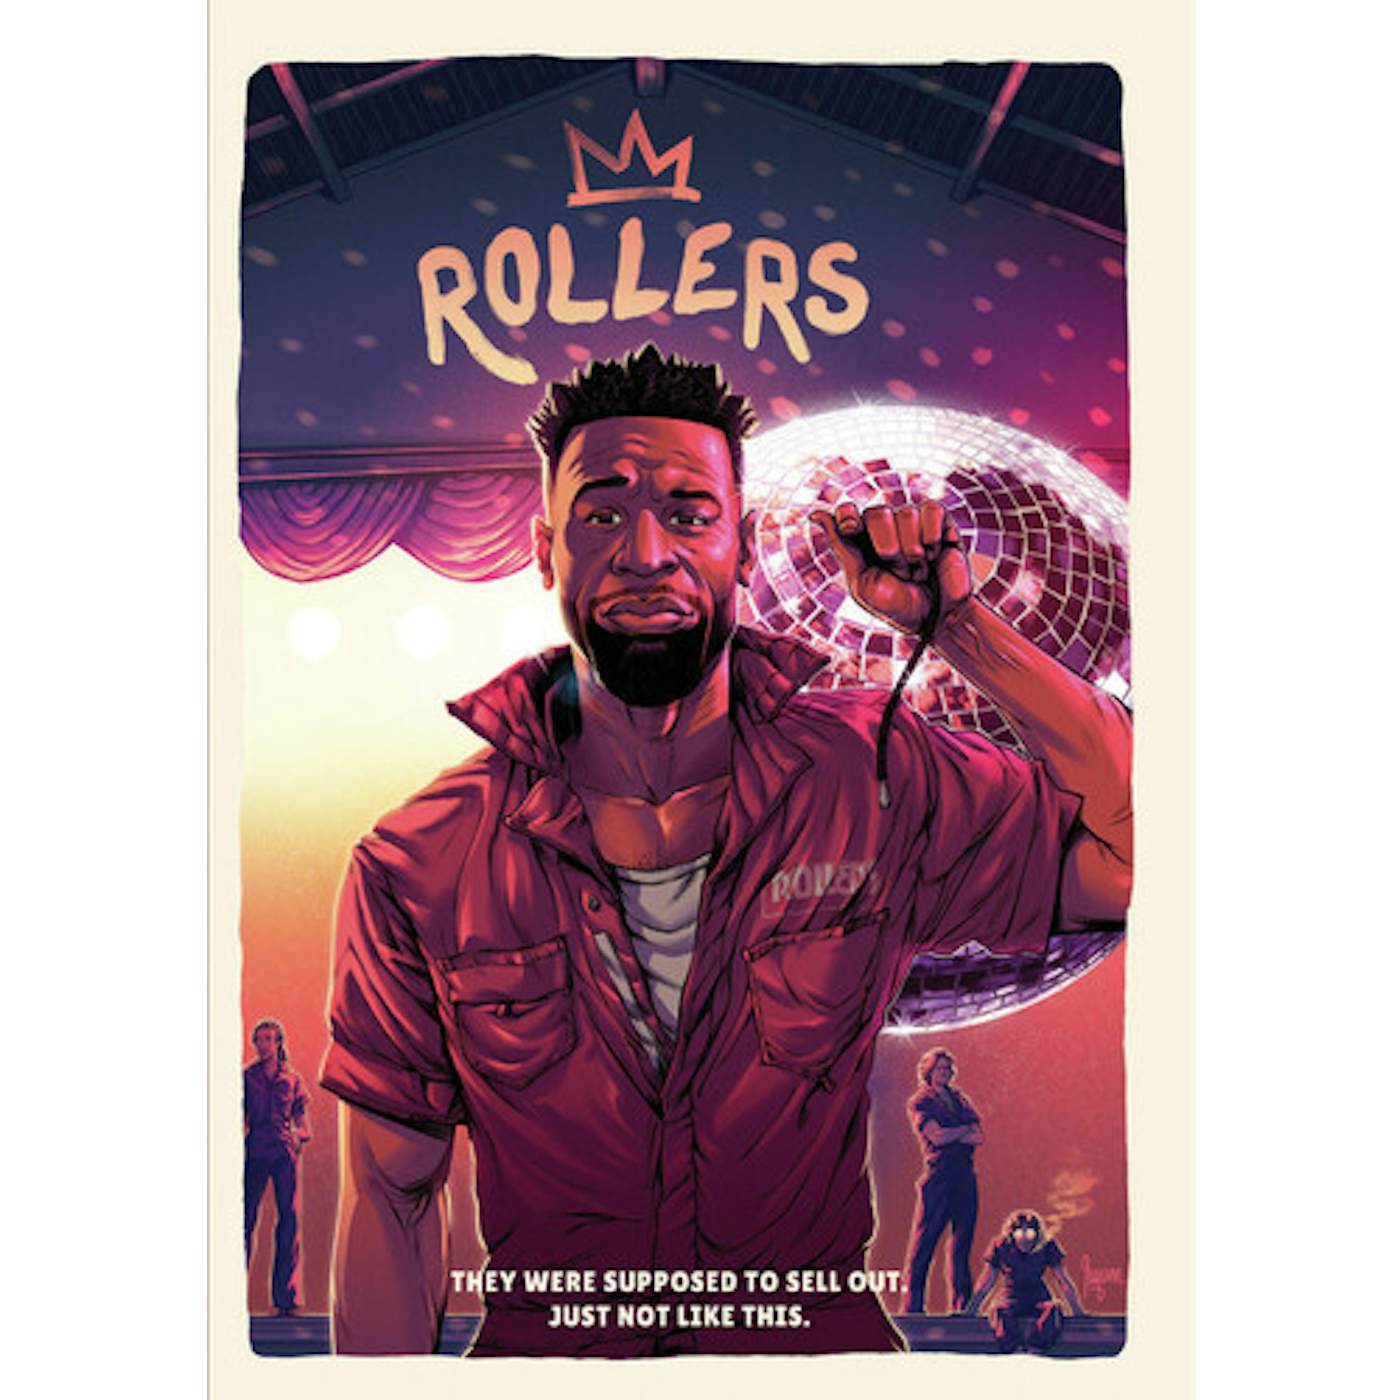 ROLLERS DVD